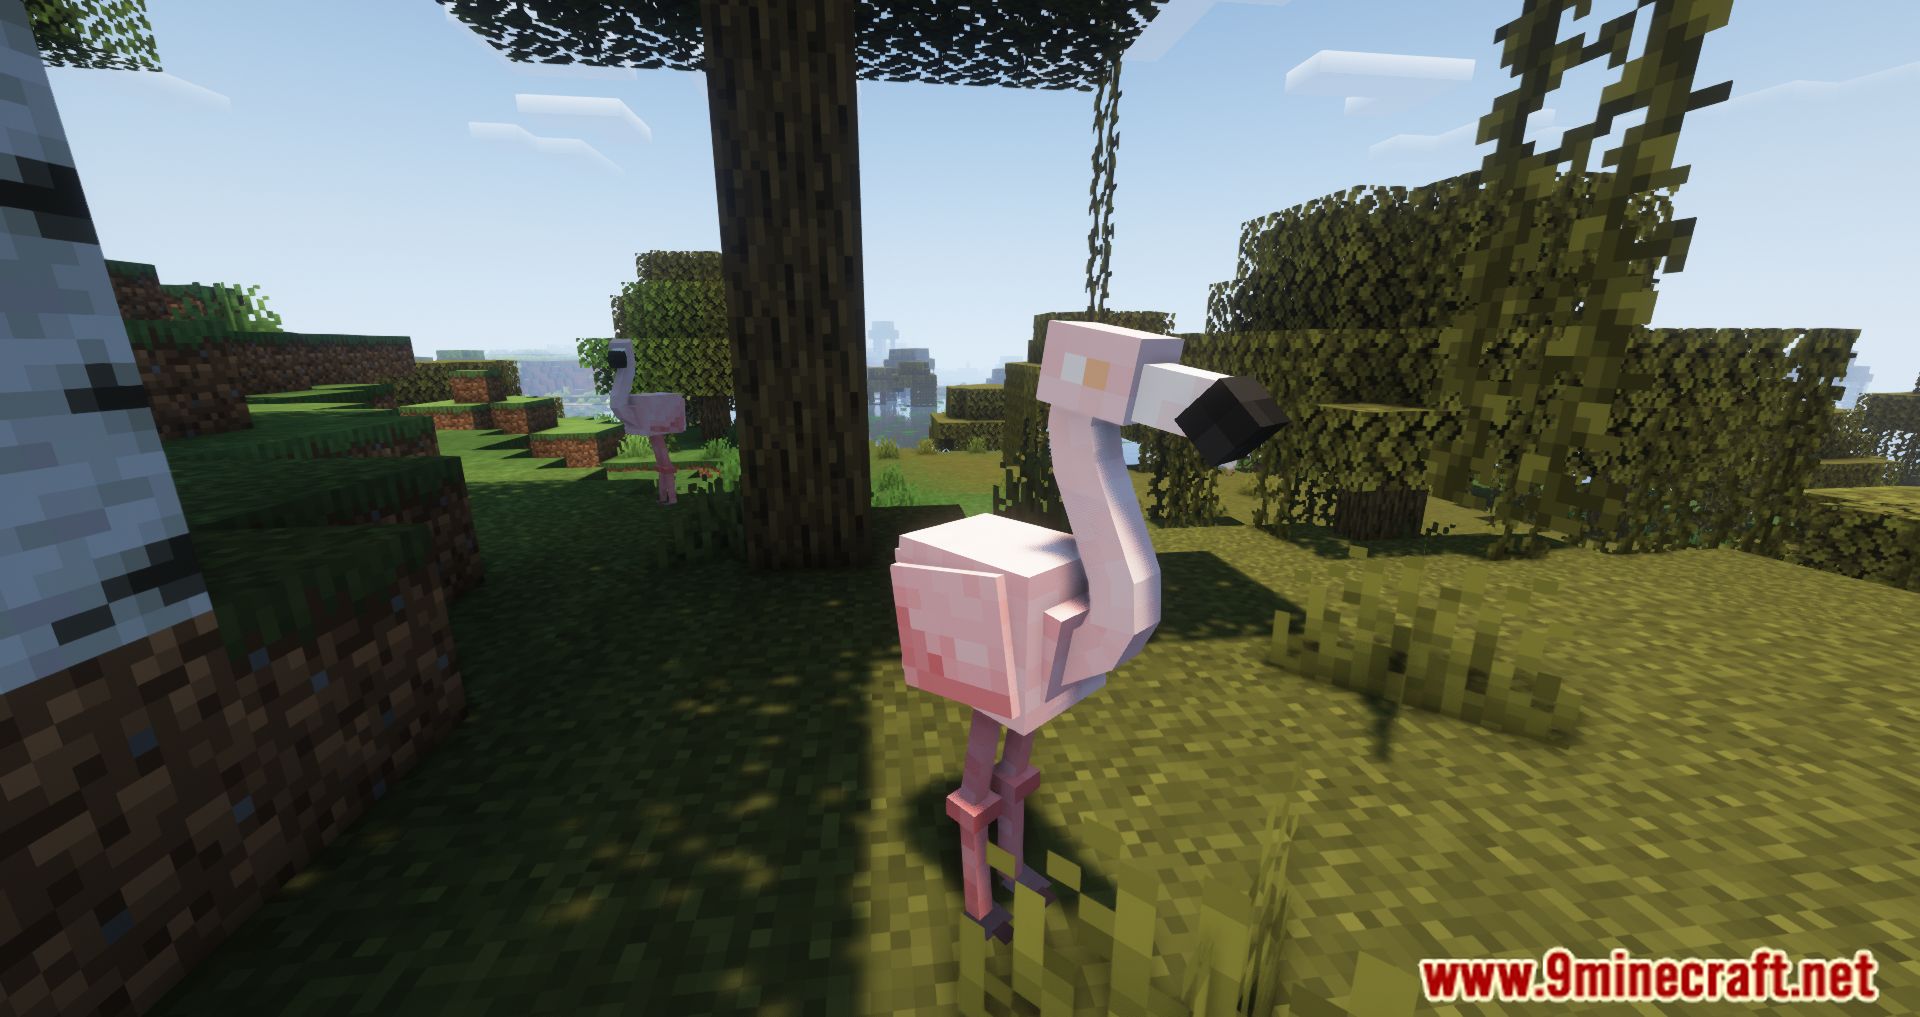 Flamingo, oh, oh, oh Mod (1.16.5, 1.15.2) - Lovely Creature With Pink Color 4